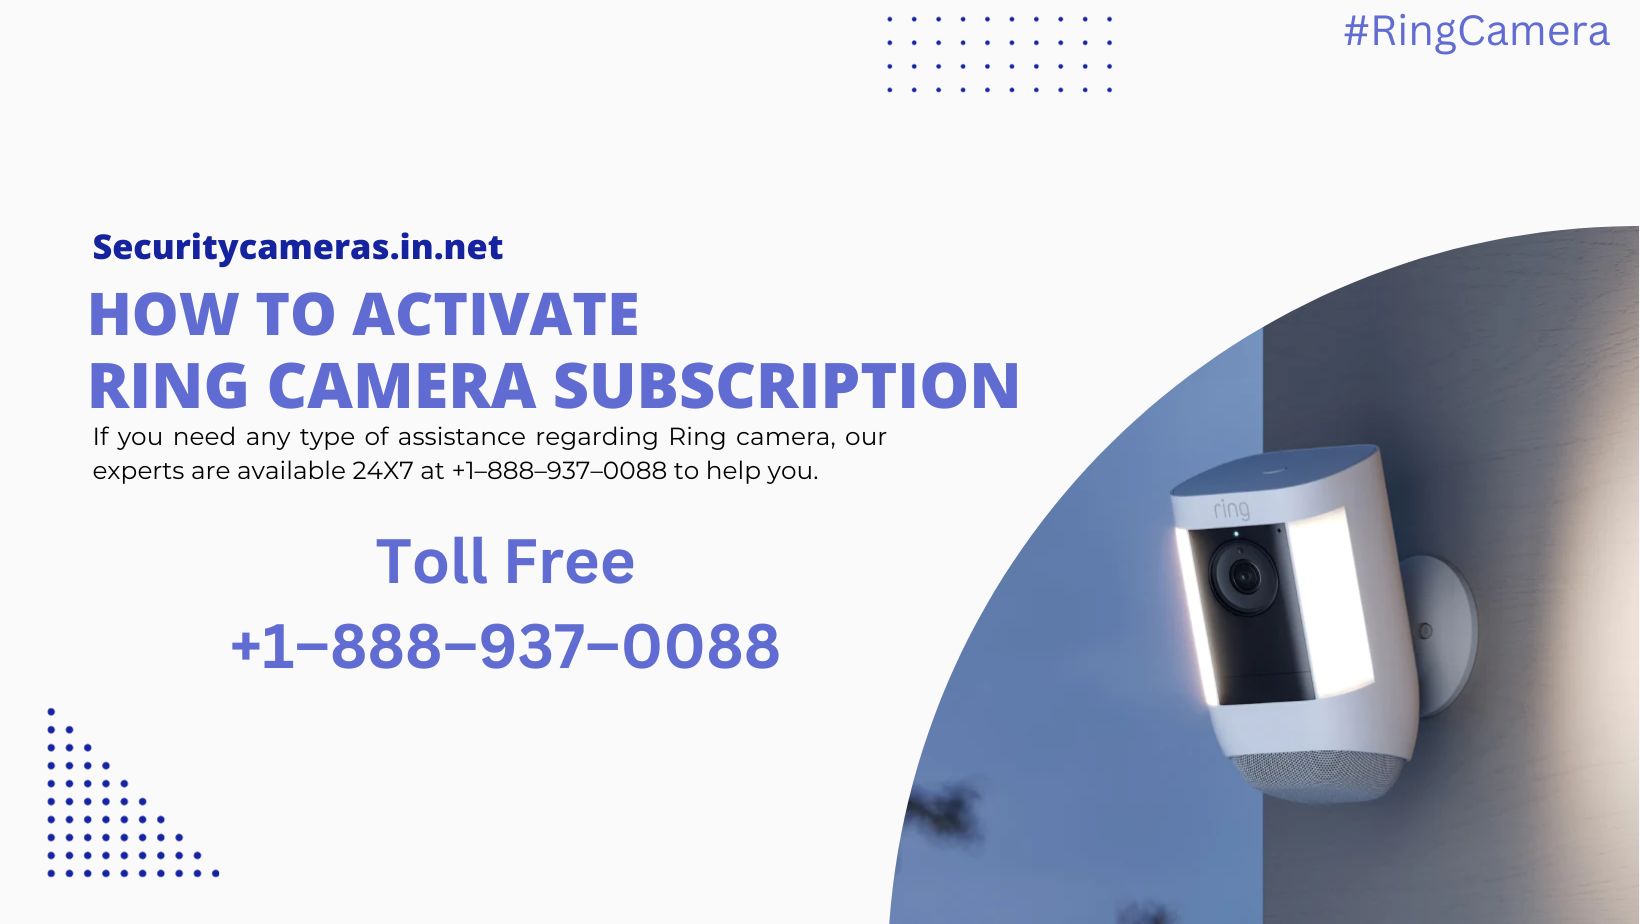 Activating Your Ring Camera Subscription: Call +1–888–937–0088